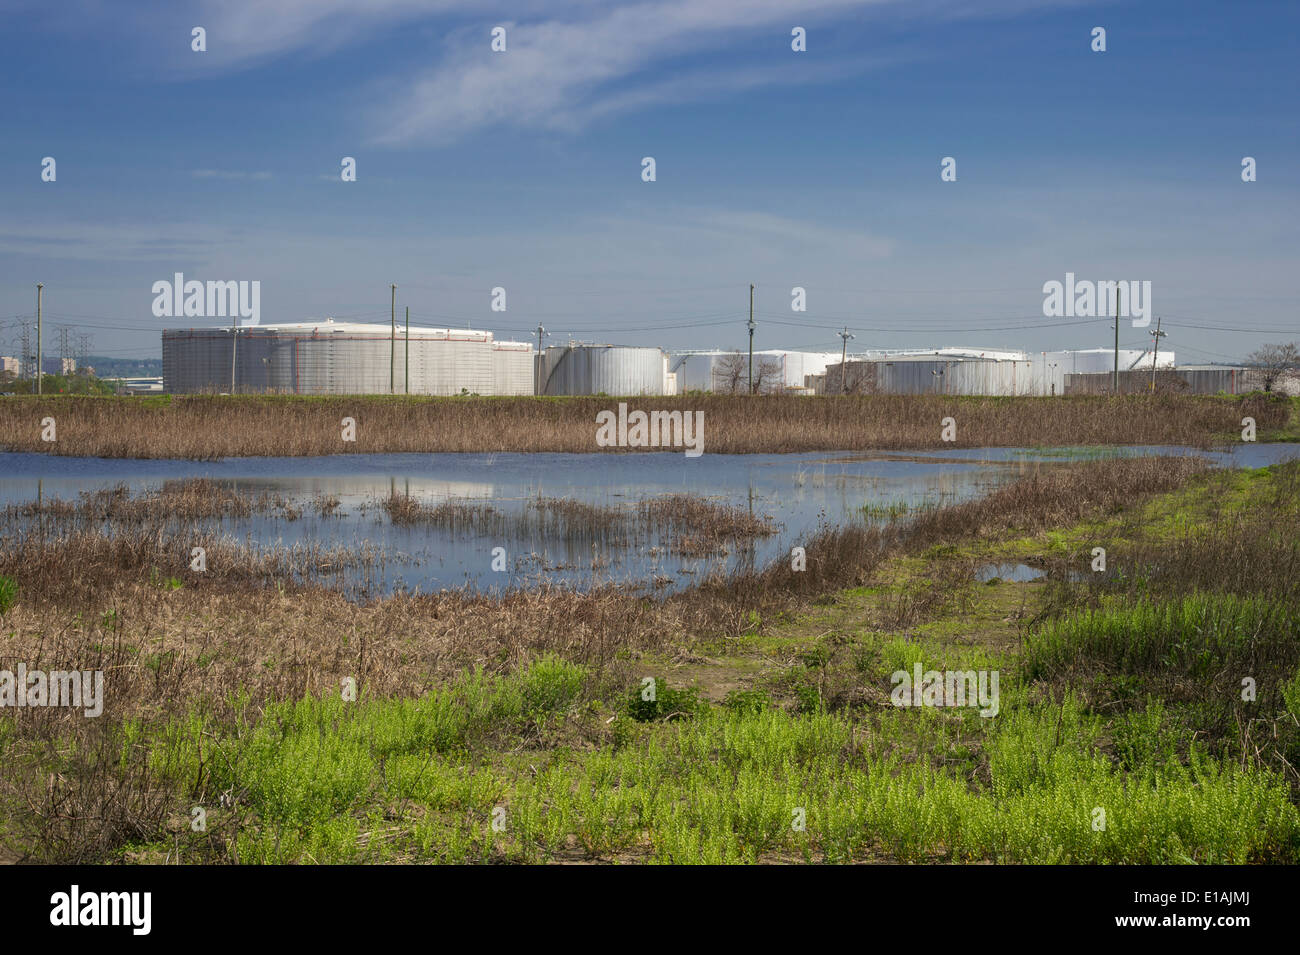 Storage Tanks With Marsh In Foreground Stock Photo